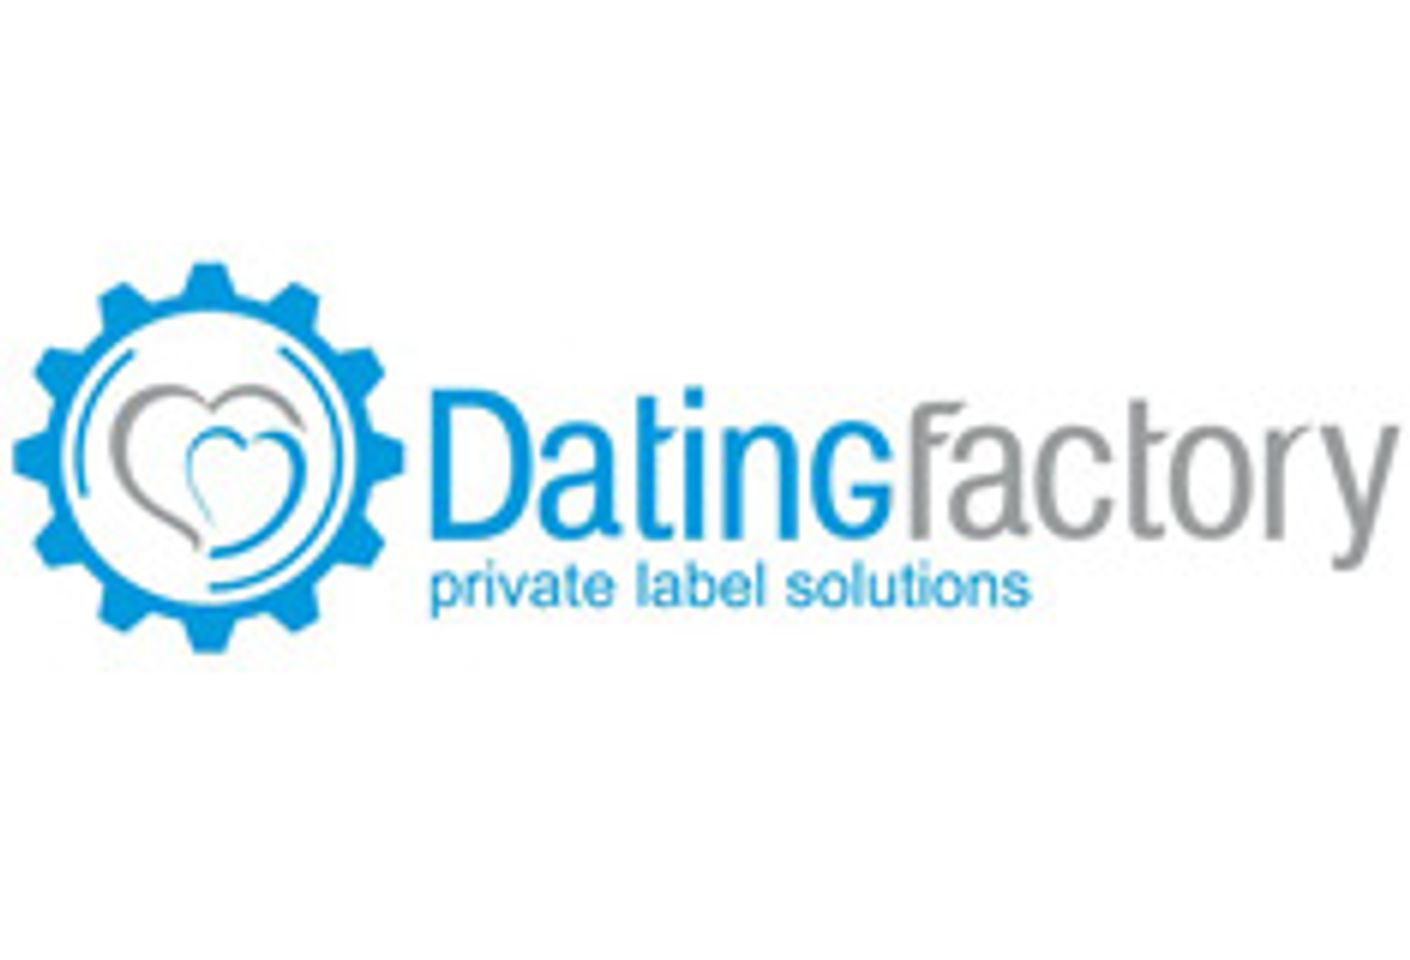 Dating Factory Offers Affiliates Low-Cost Payoneer Card